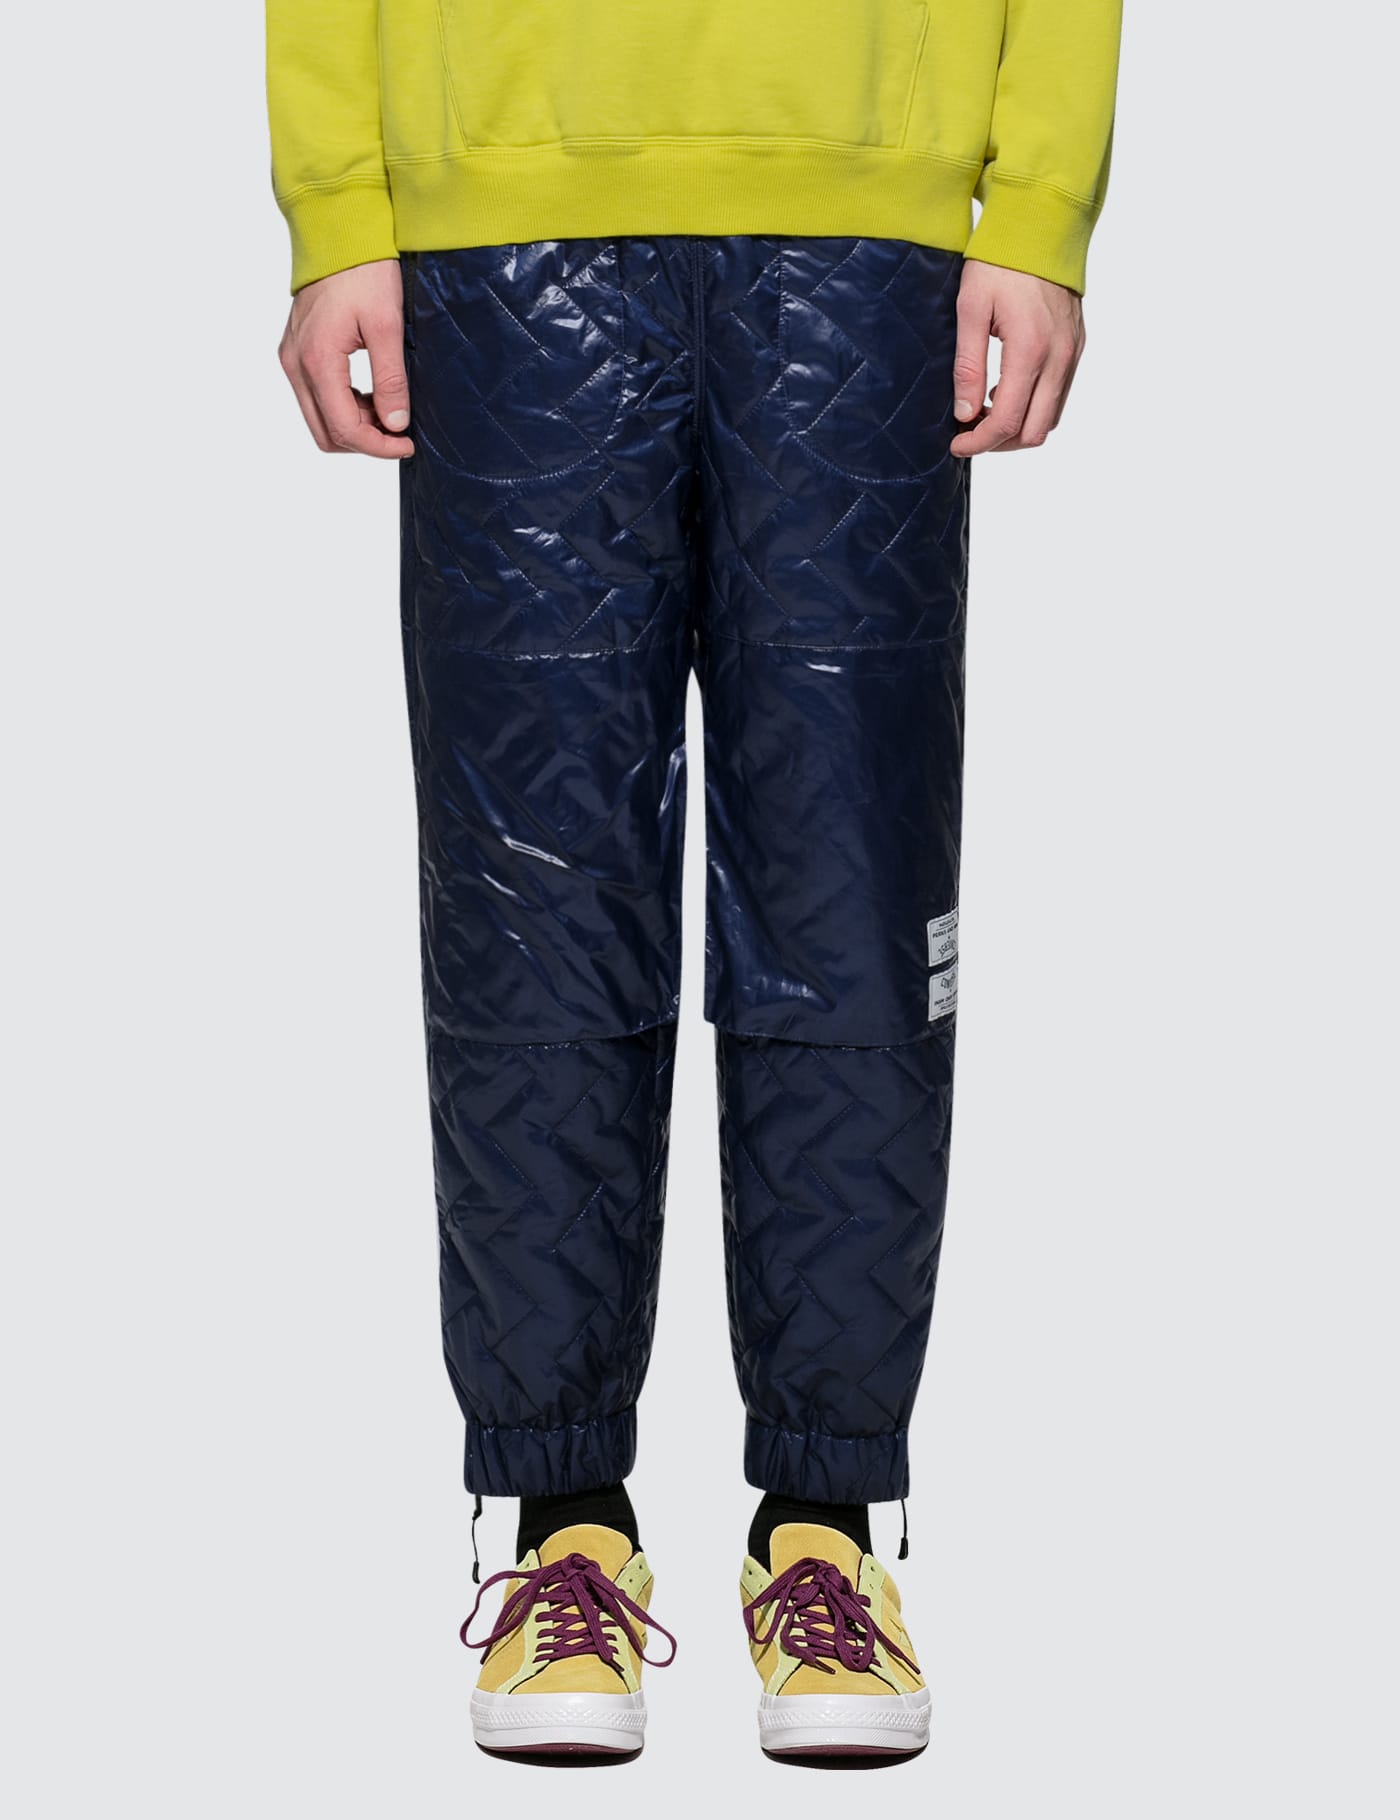 converse quilted sweatpants